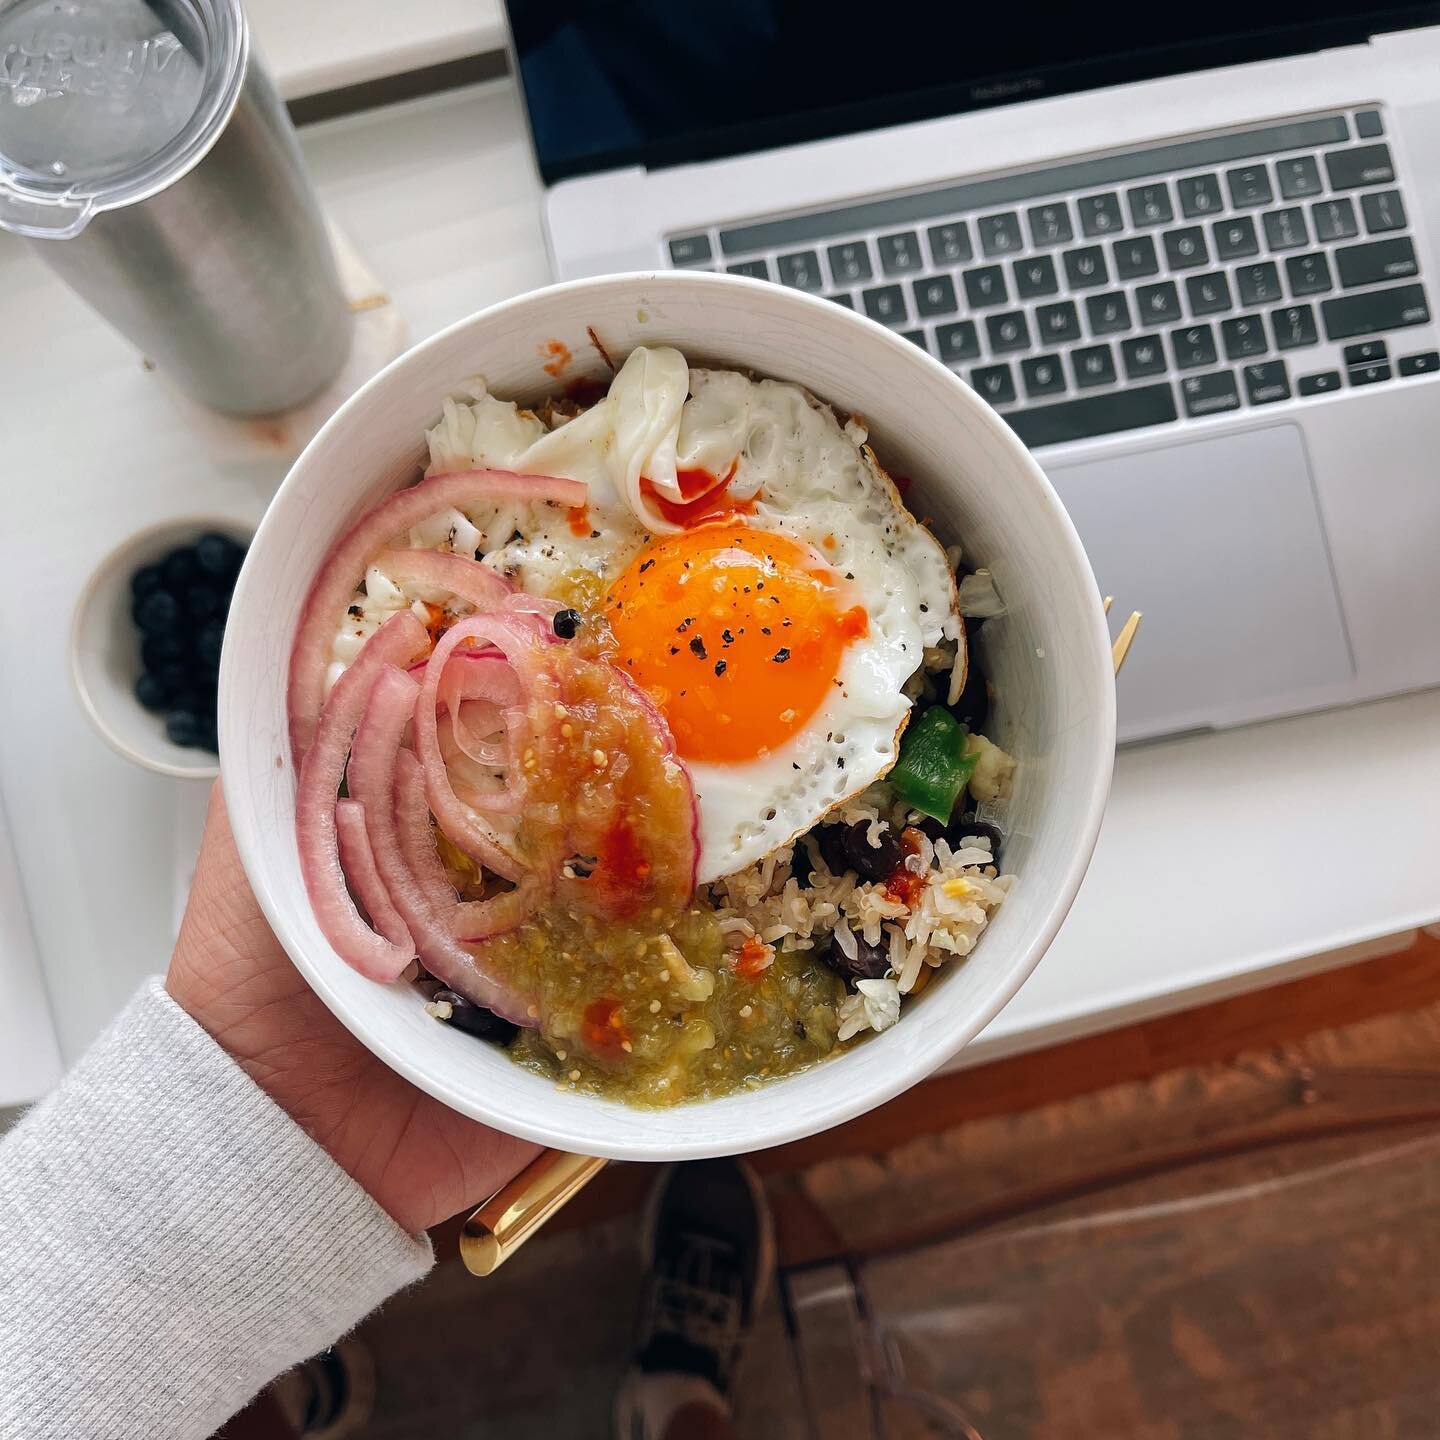 Scrum dilly yum lunch (or din). Wrote up the recipe and threw it up on TAB. Deats below too. Make it this week, I think you&rsquo;ll like 😋

Weekday Rice Bowl
yields 1 serving

Ingredients:
1/2 cup cooked rice (I use brown basmati)
1/4 cup cooked qu